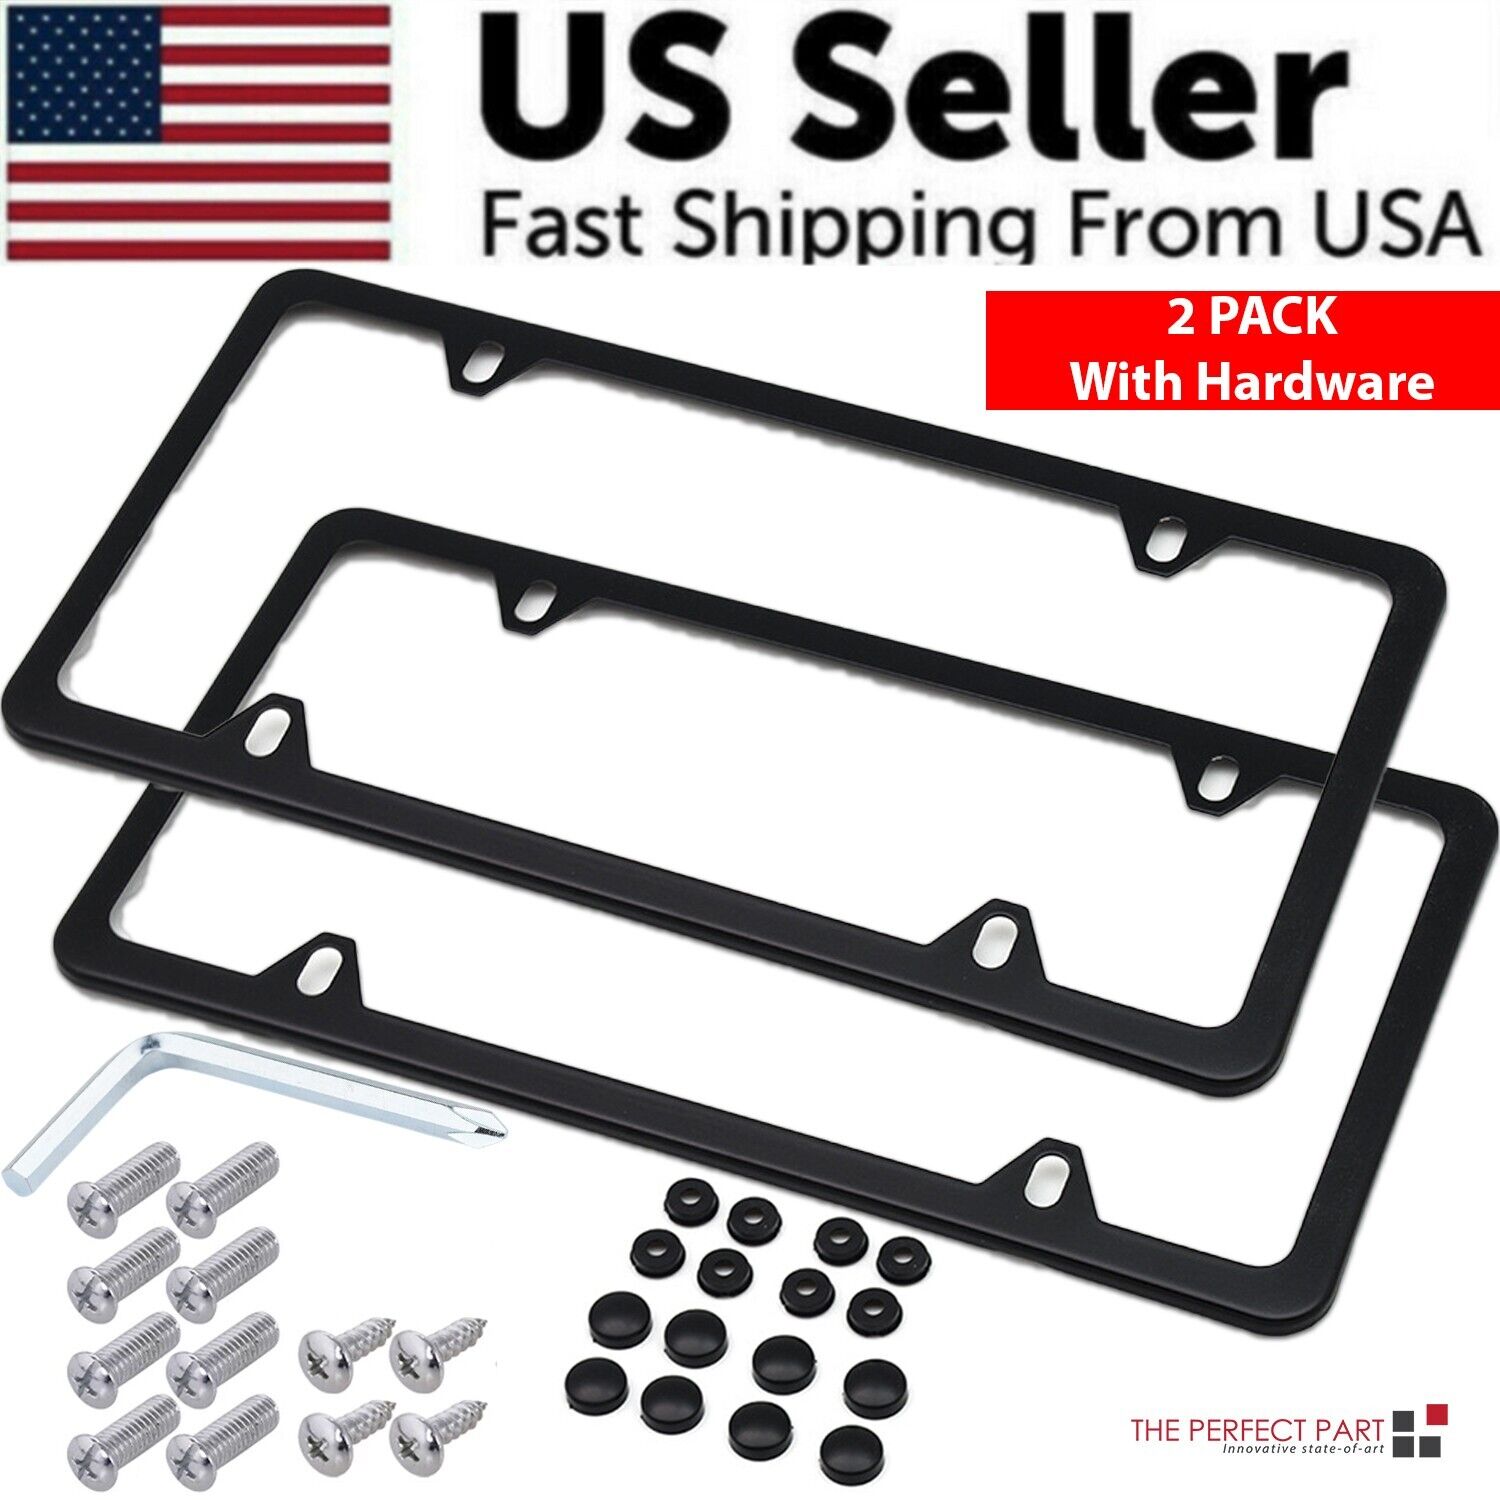 2x High Quality Stainless Steel Metal License Plate Frame Tag Cover Black New US